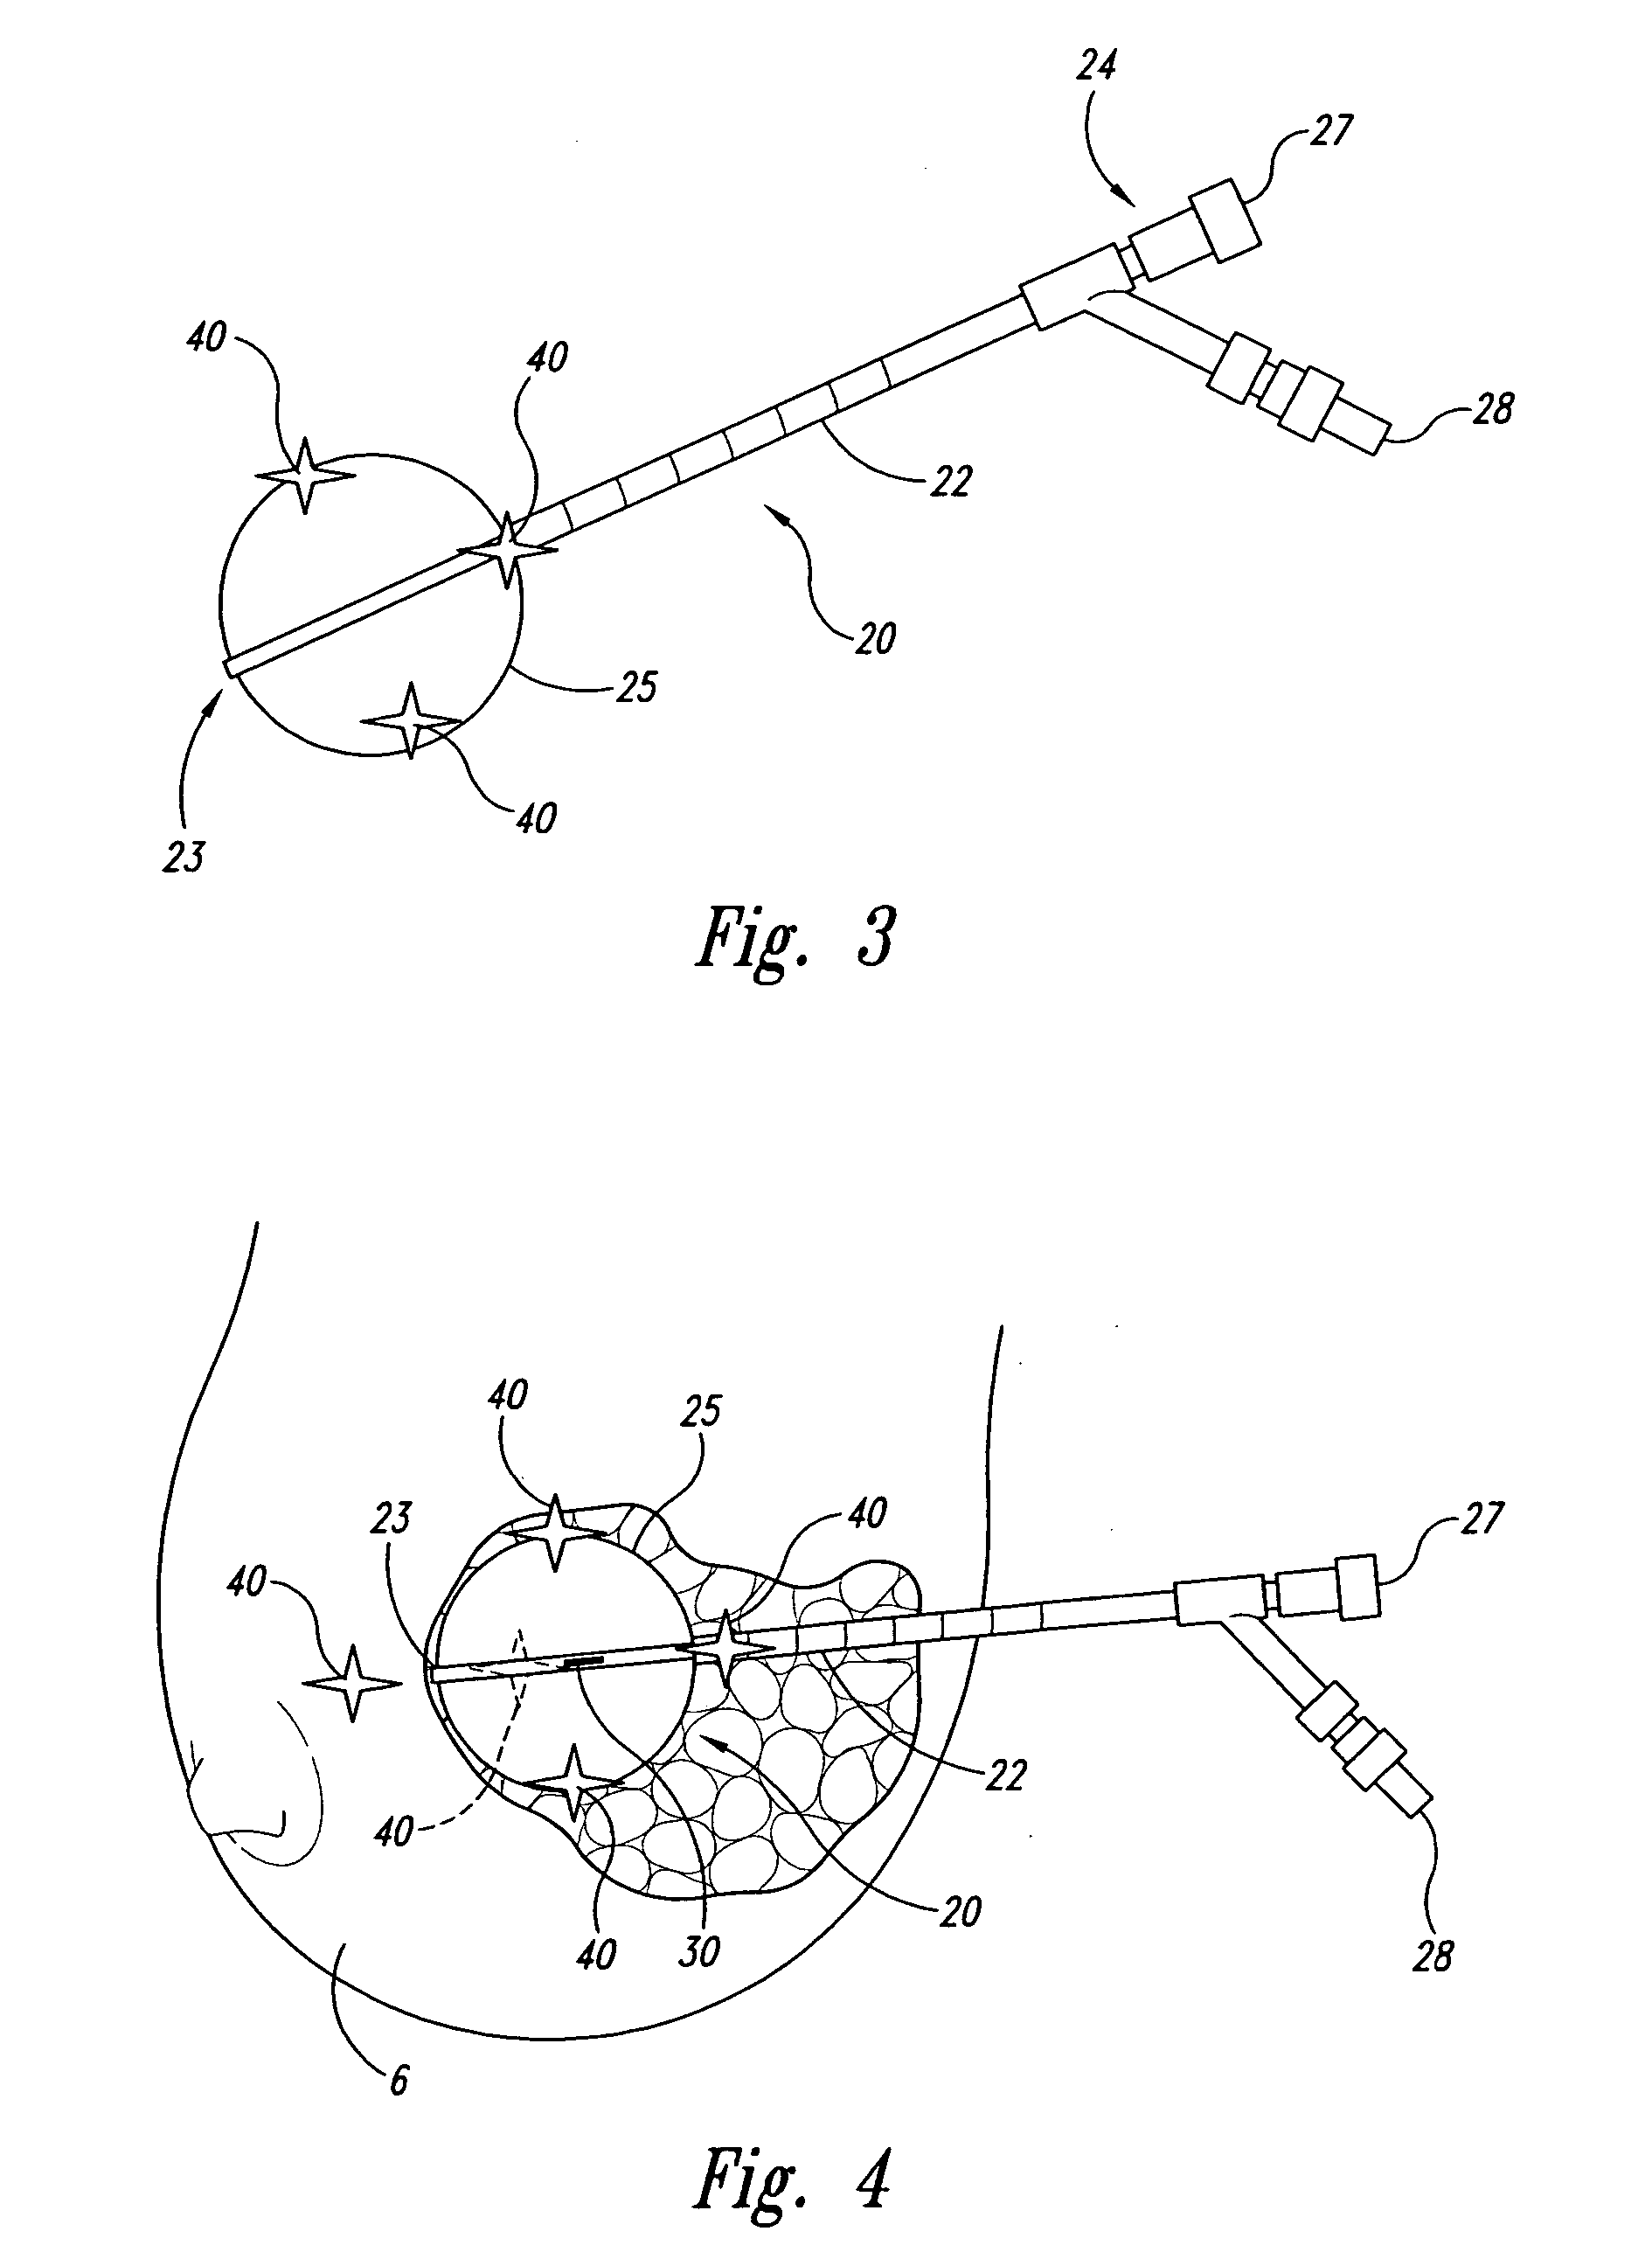 Systems and methods for treating a patient using radiation therapy